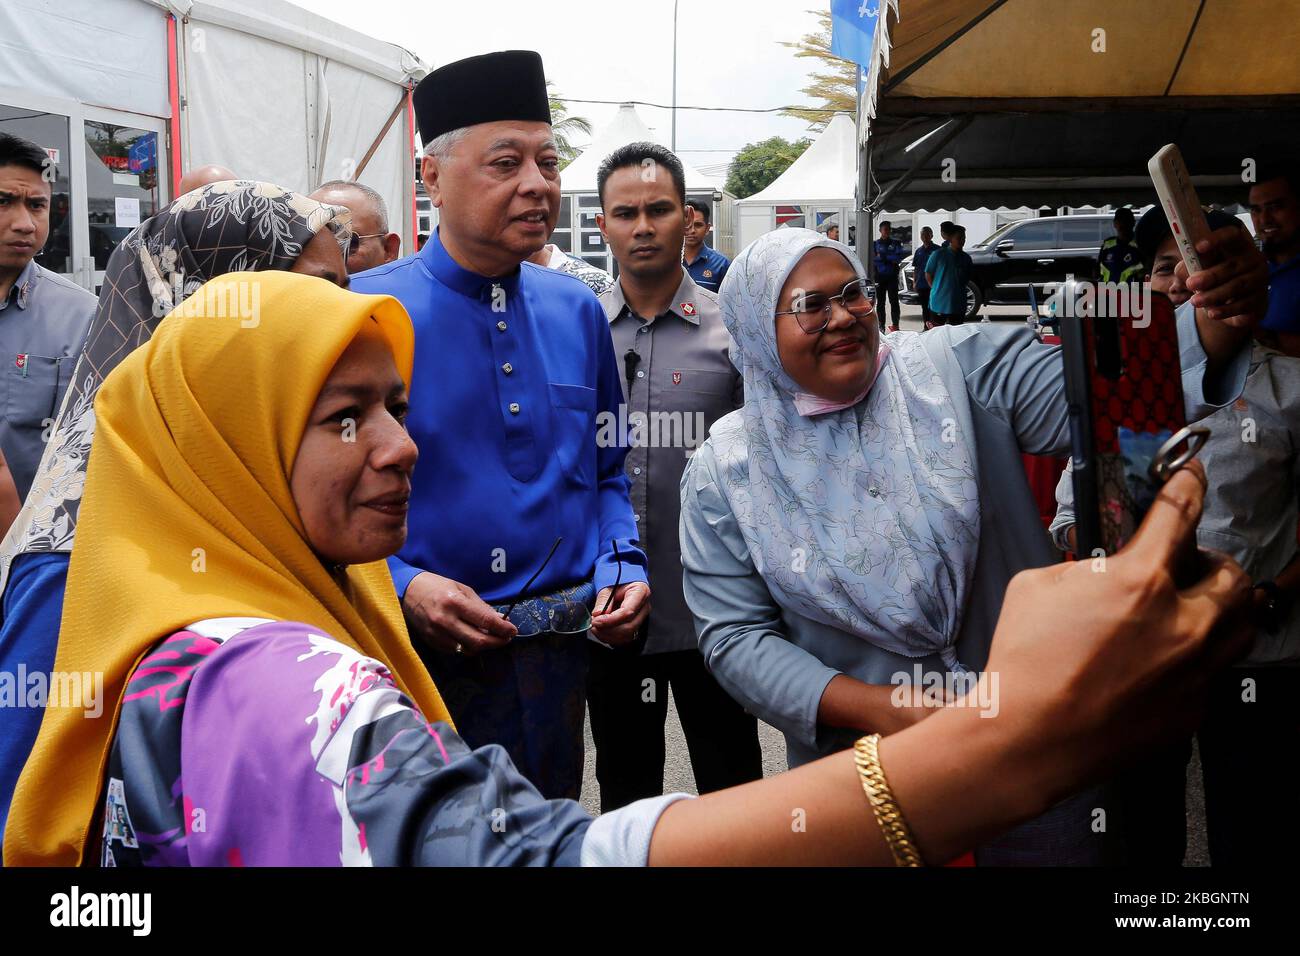 Supporters take selfies with Malaysian Caretaker Prime Minister Ismail Sabri Yaakob a day before the nomination day, in Bera, Pahang, Malaysia November 4, 2022. REUTERS/Lai Seng Sin Stock Photo